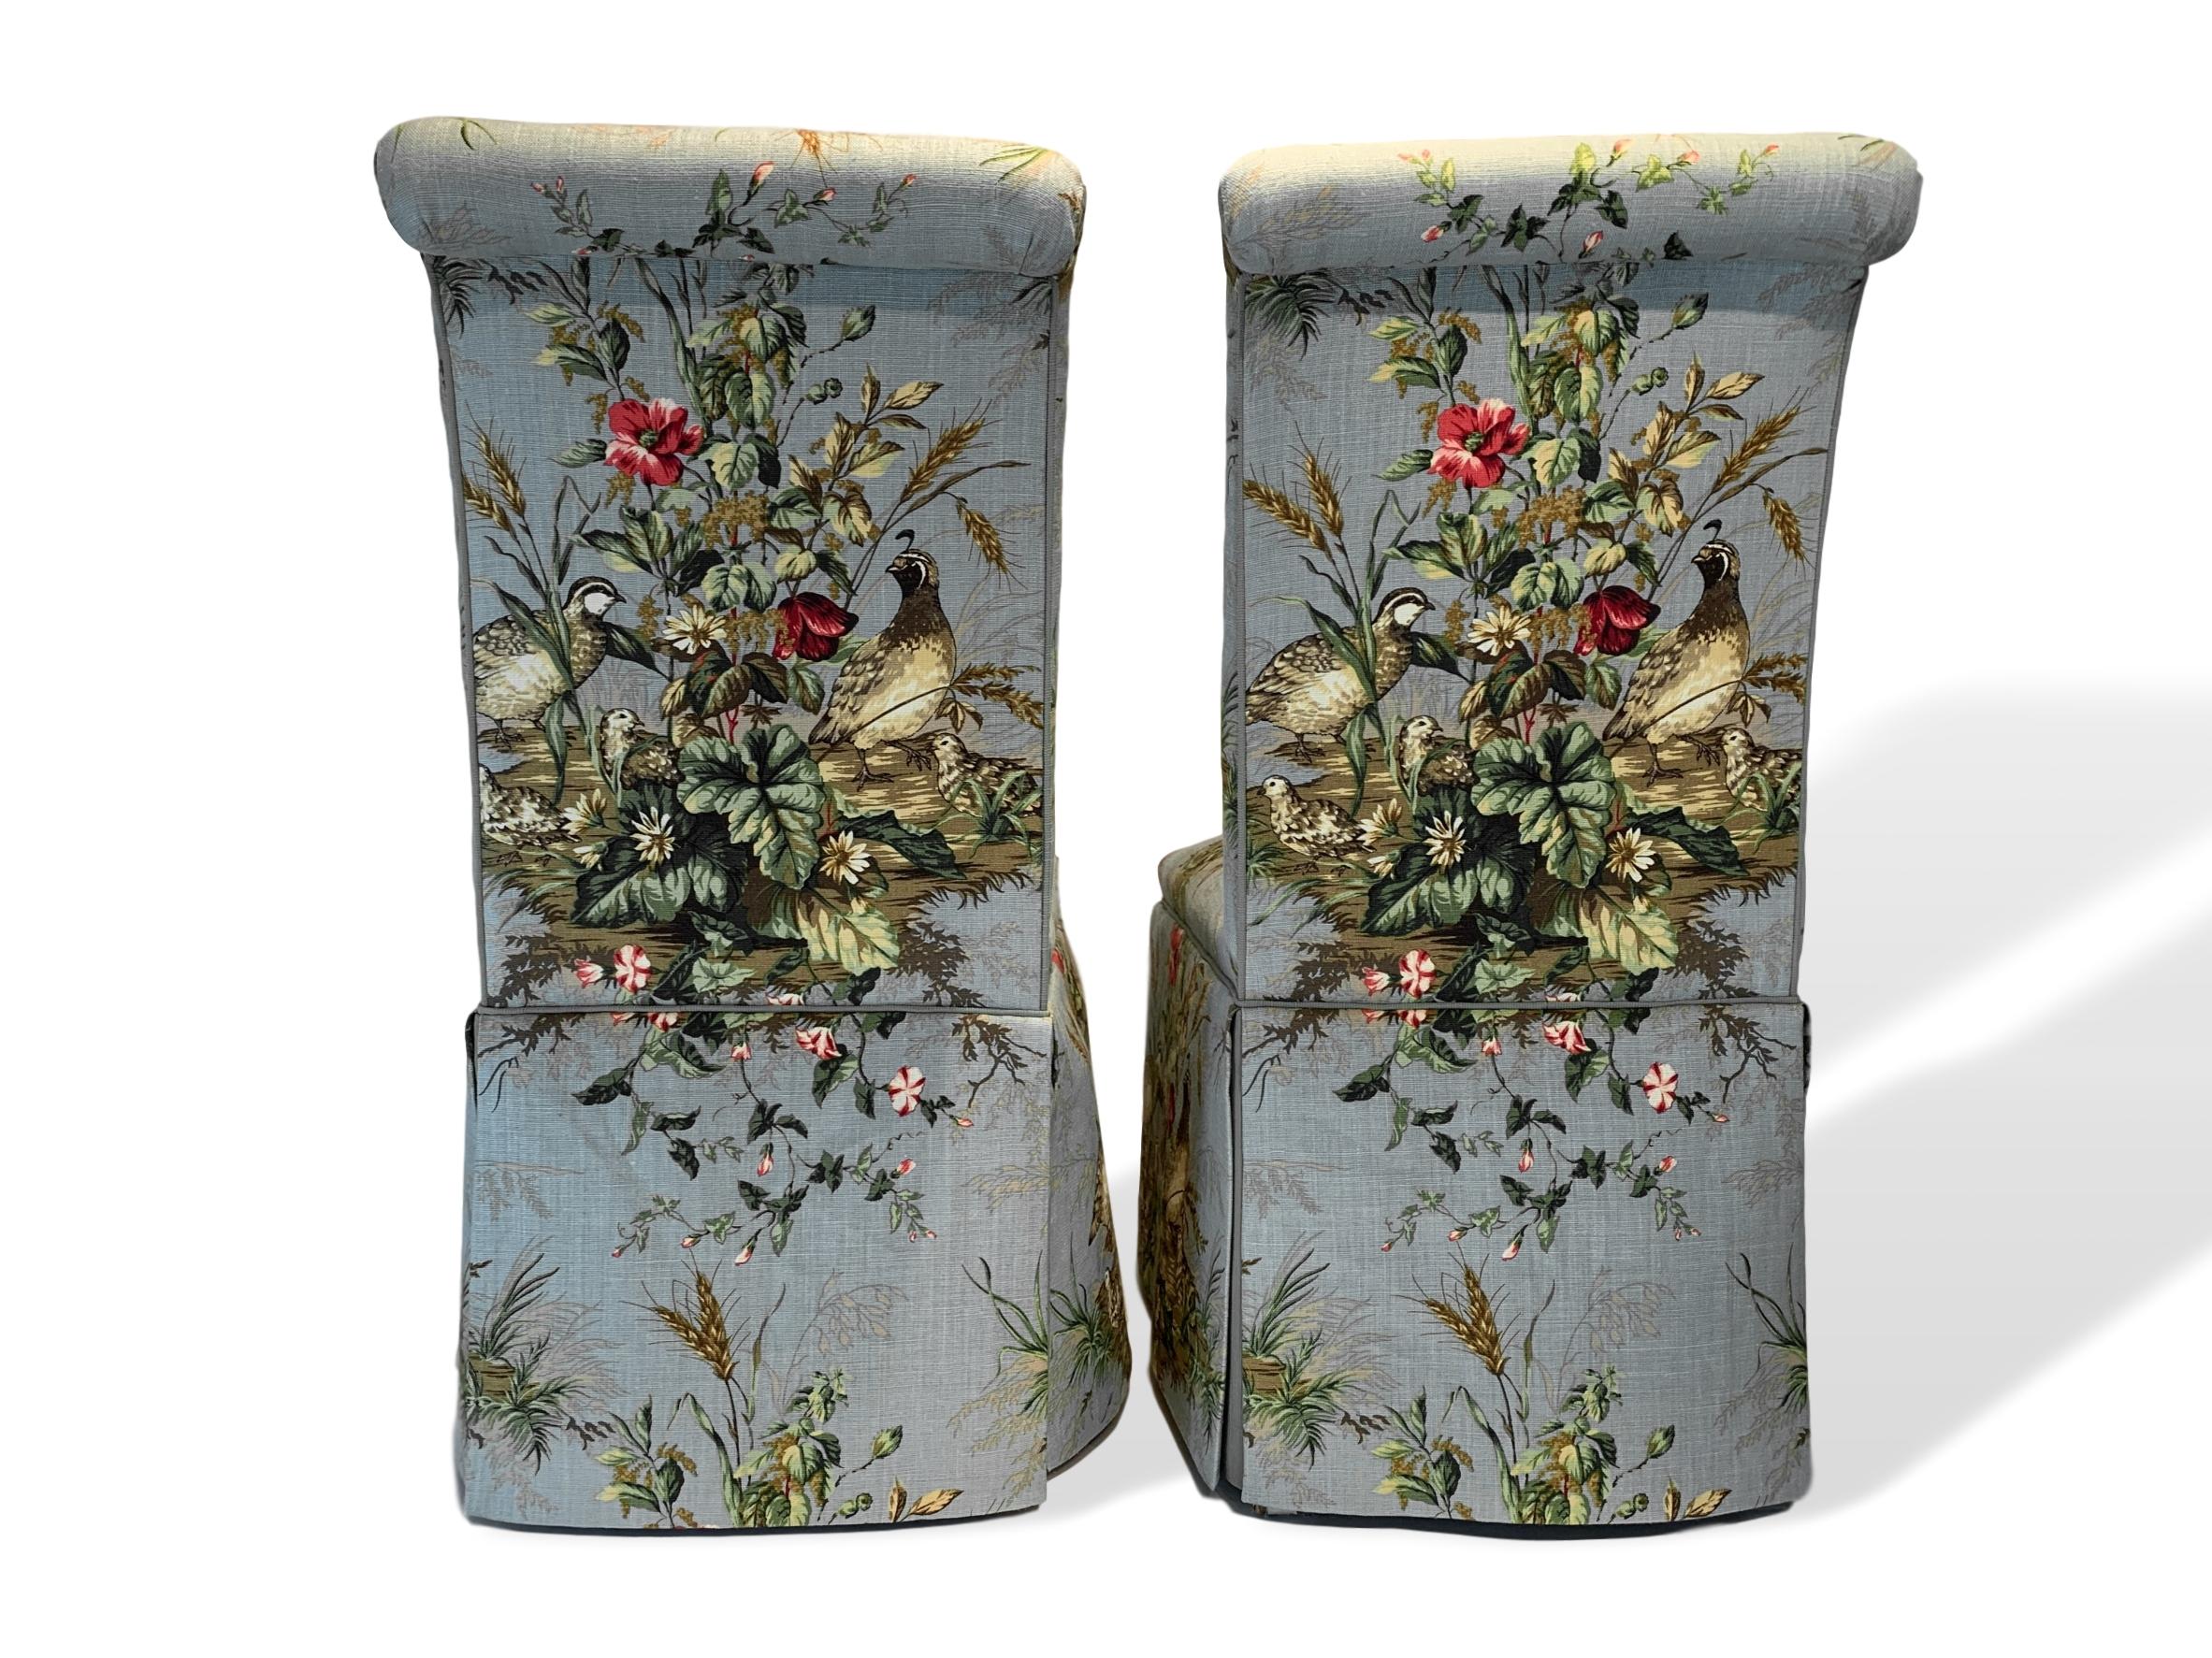 Contemporary Pair of Parsons Chairs in Scalamandré Iconic Fabric 'Edwin's Covey' Brand-New